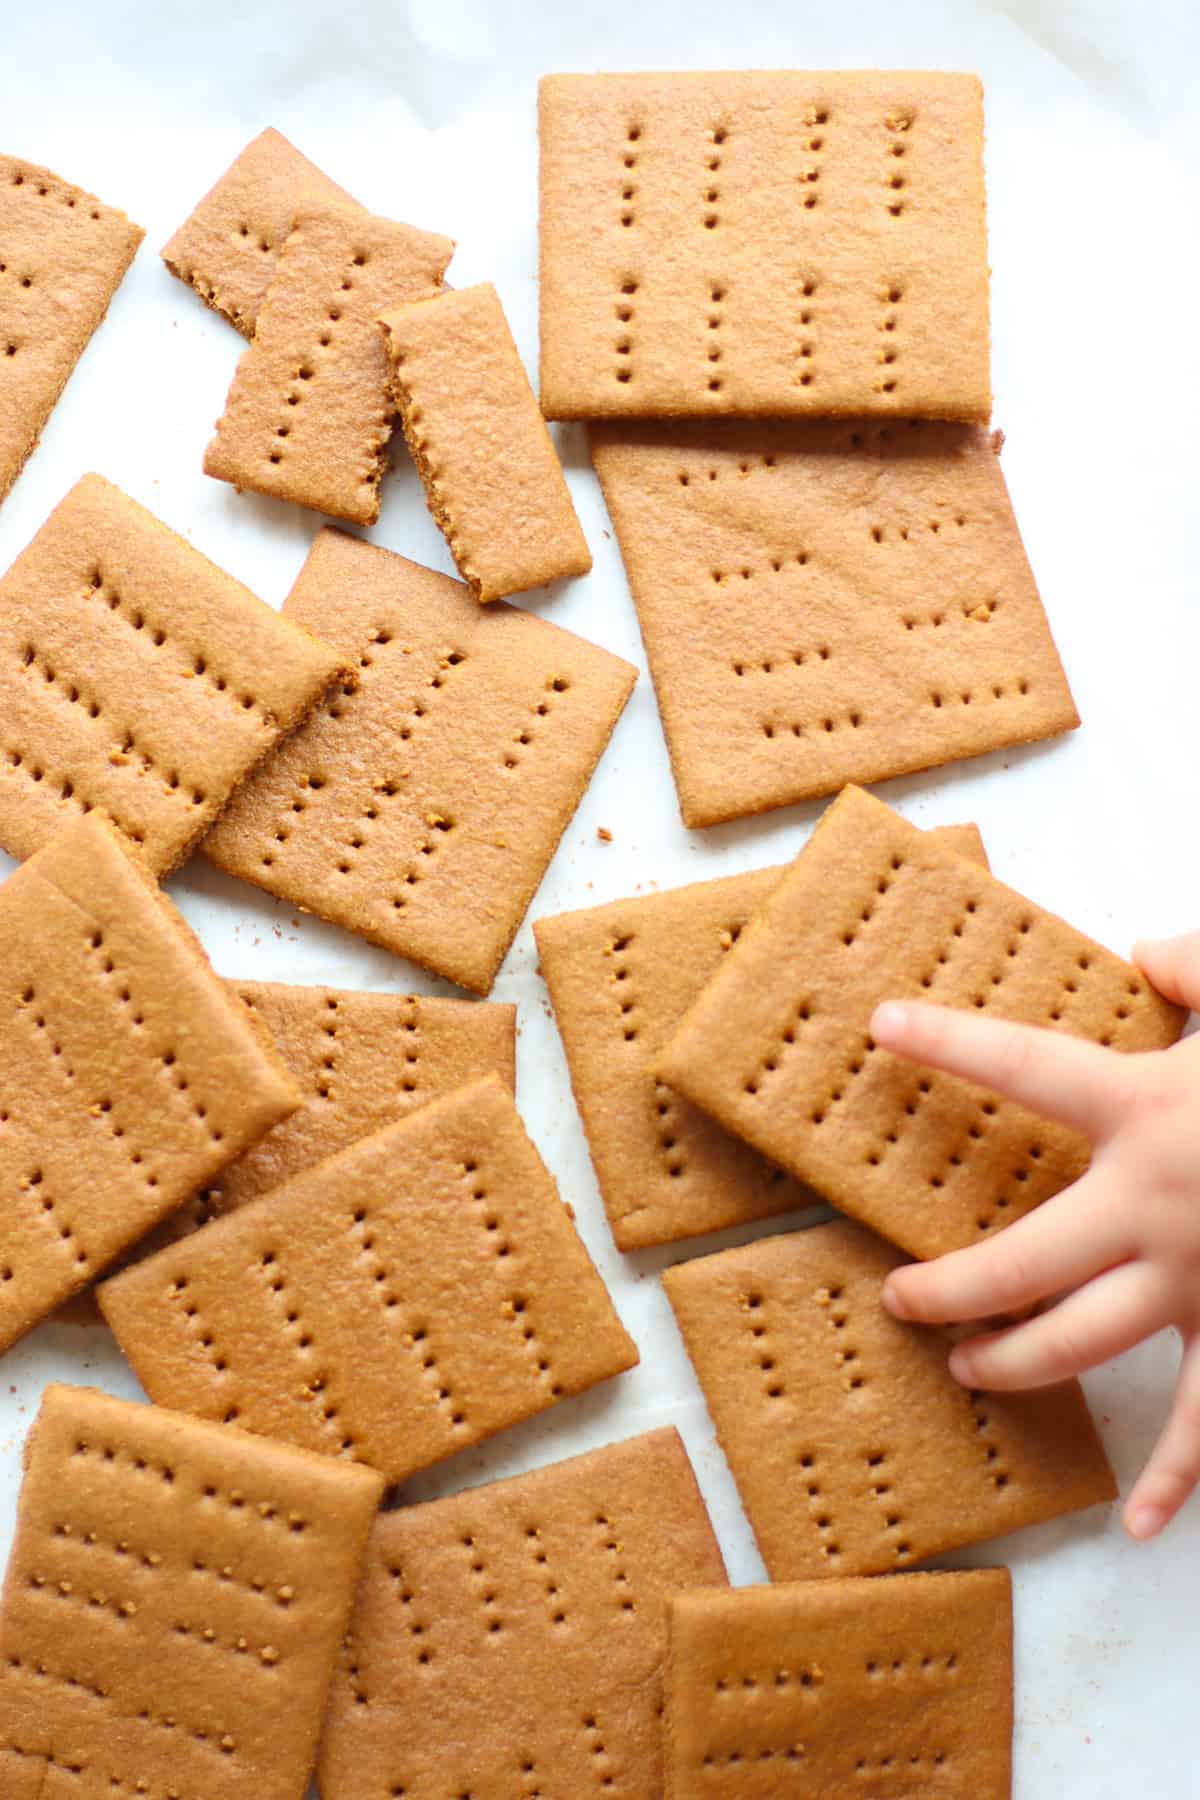 Graham crackers laid on a counter with a hand grabbing one.